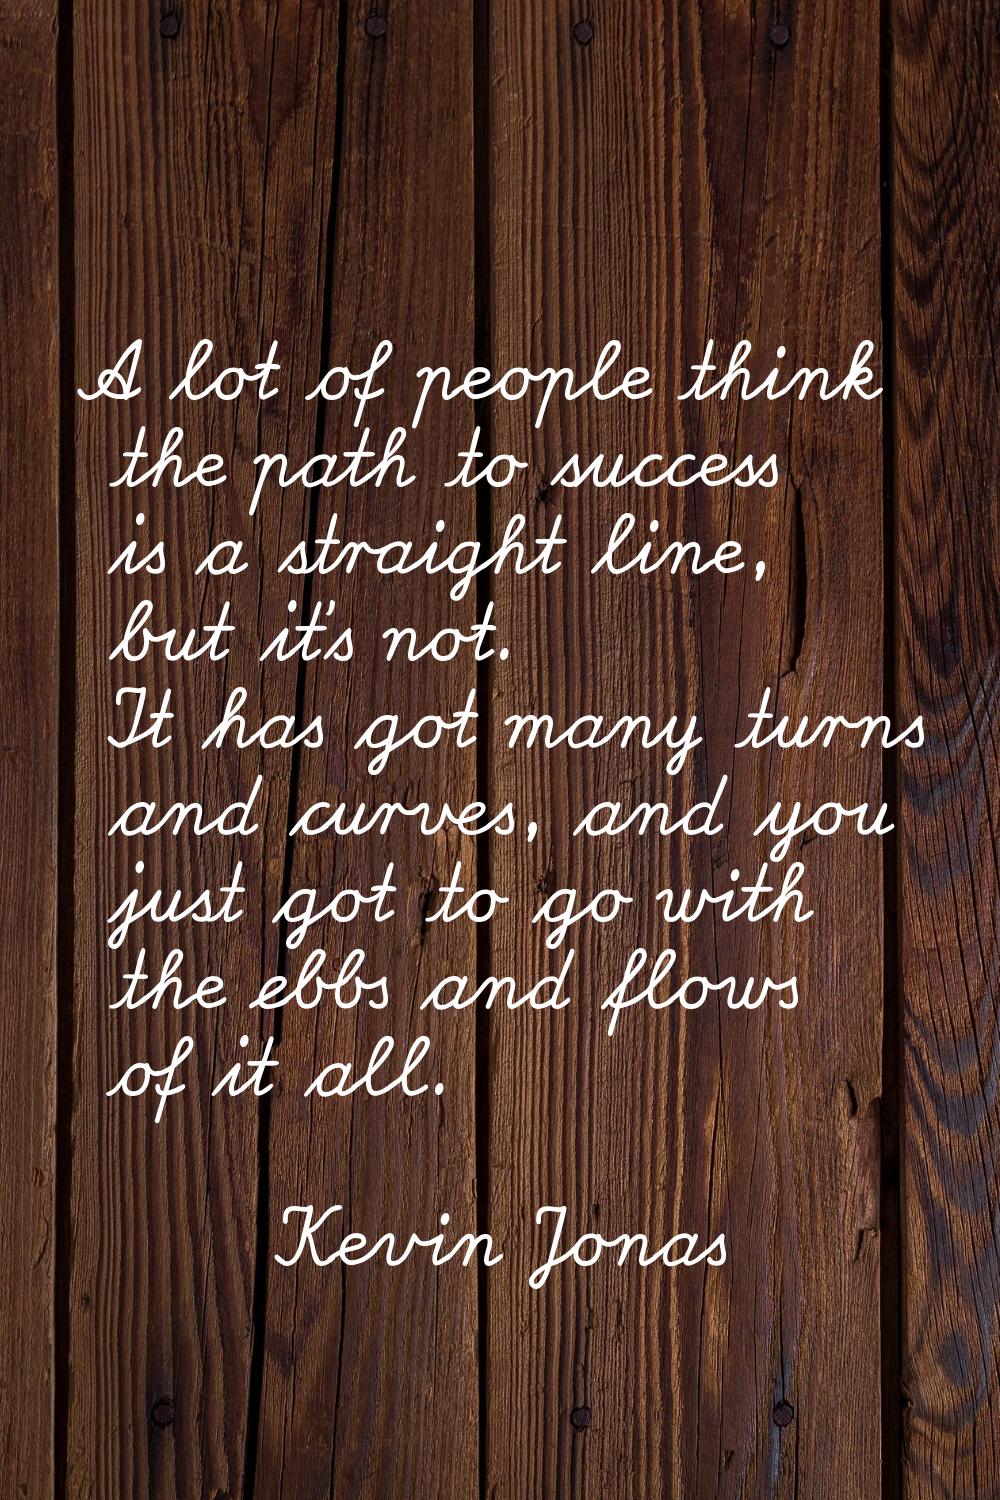 A lot of people think the path to success is a straight line, but it's not. It has got many turns a